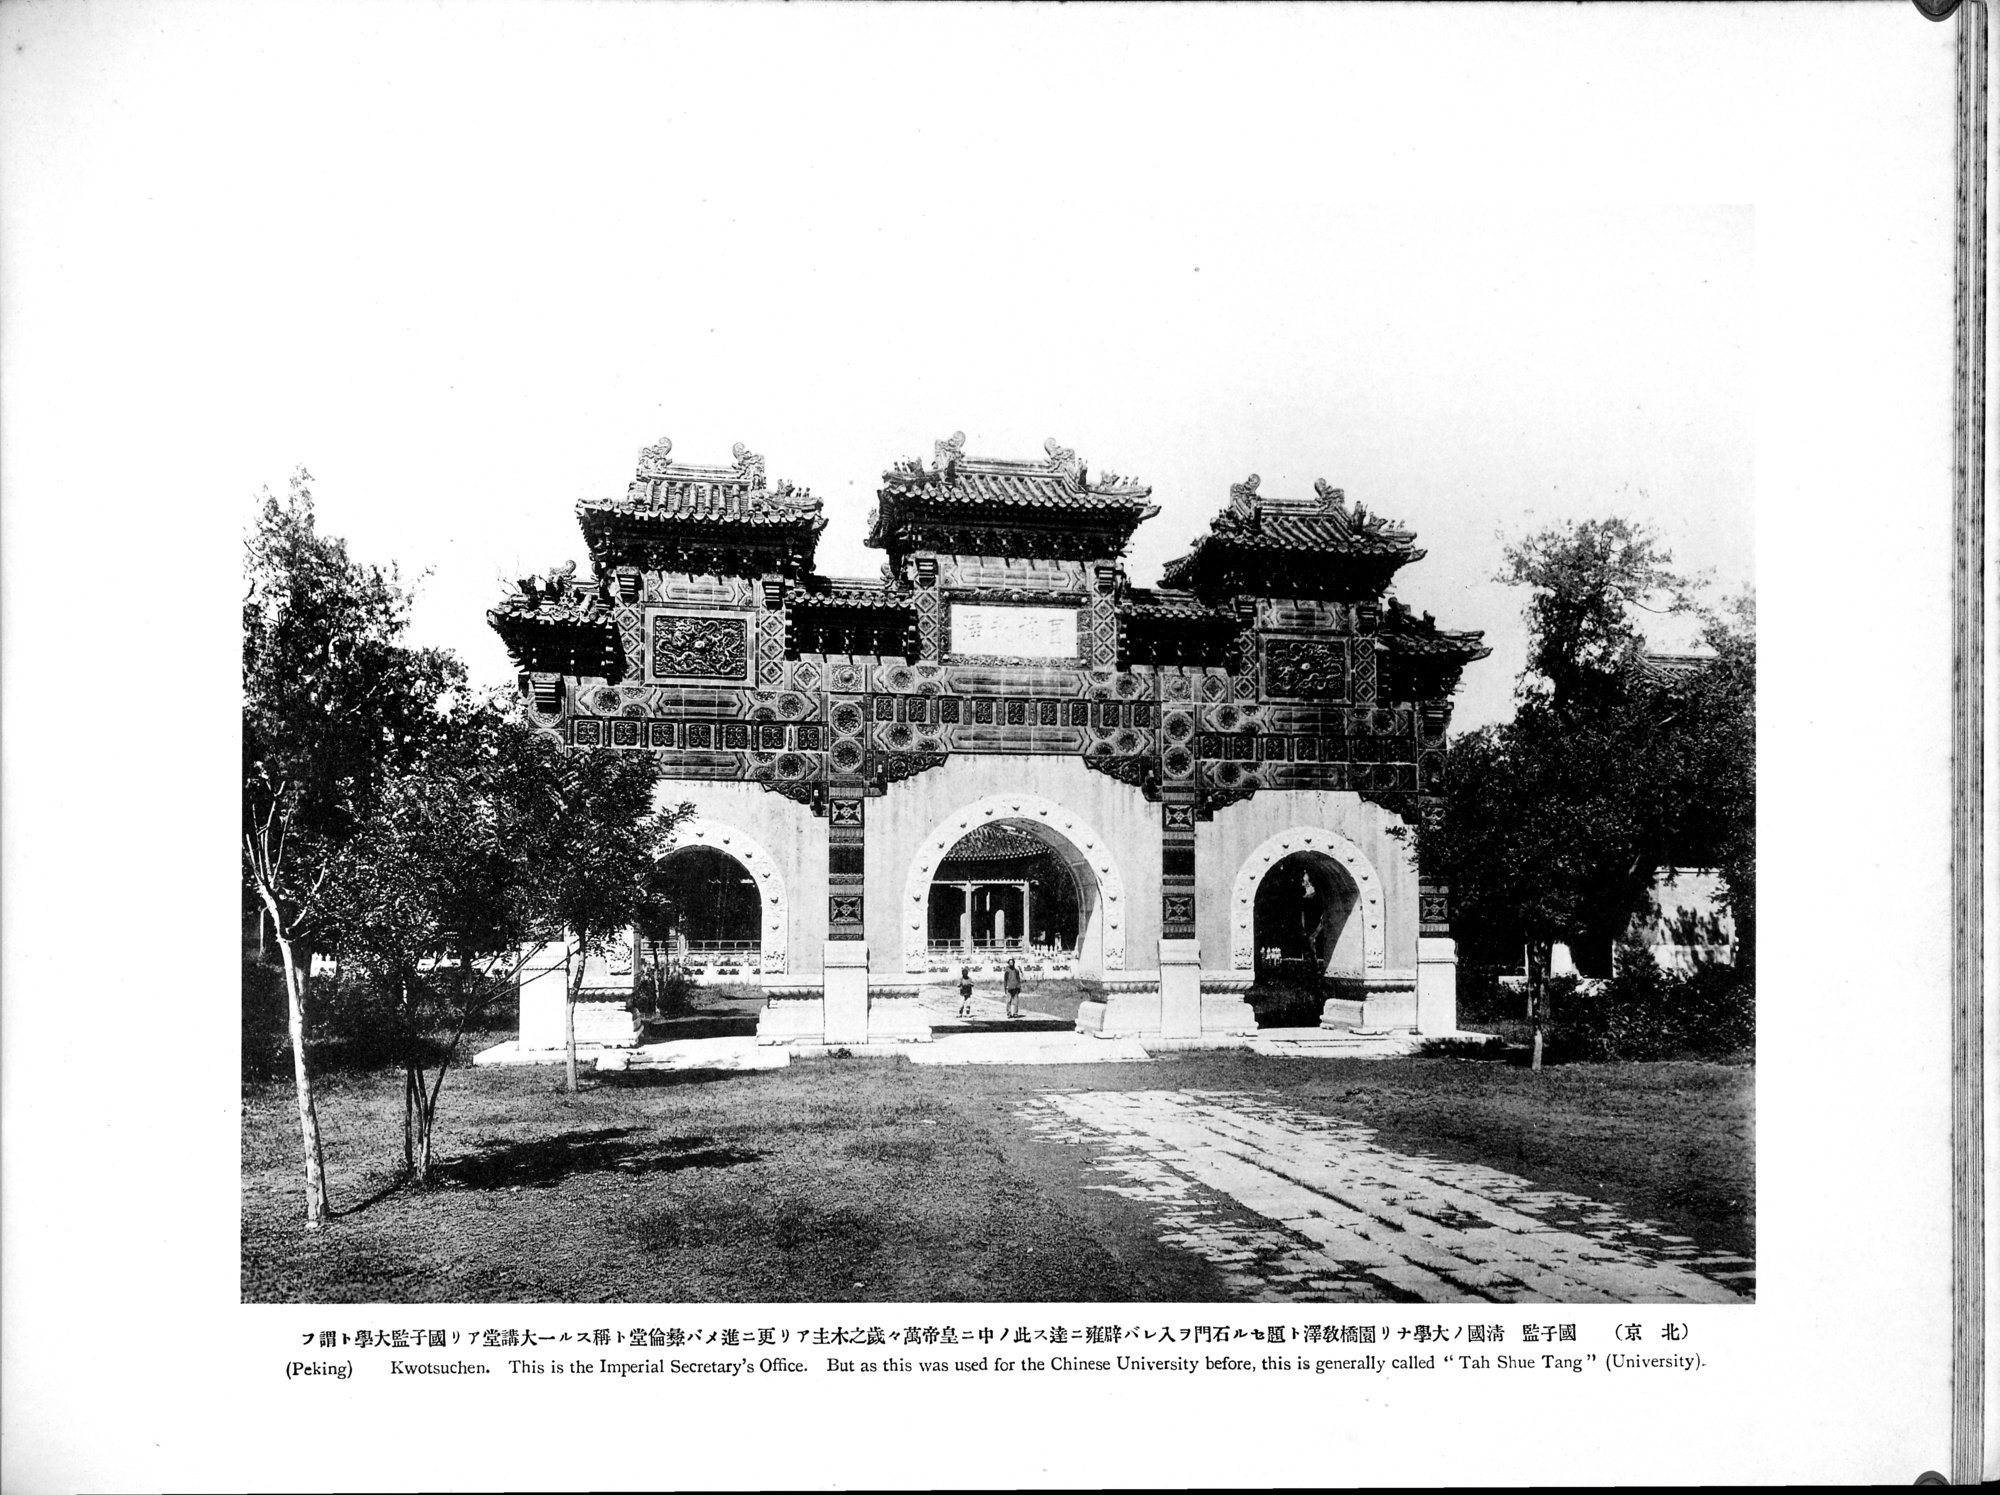 Views and Custom of North China : vol.1 / Page 165 (Grayscale High Resolution Image)